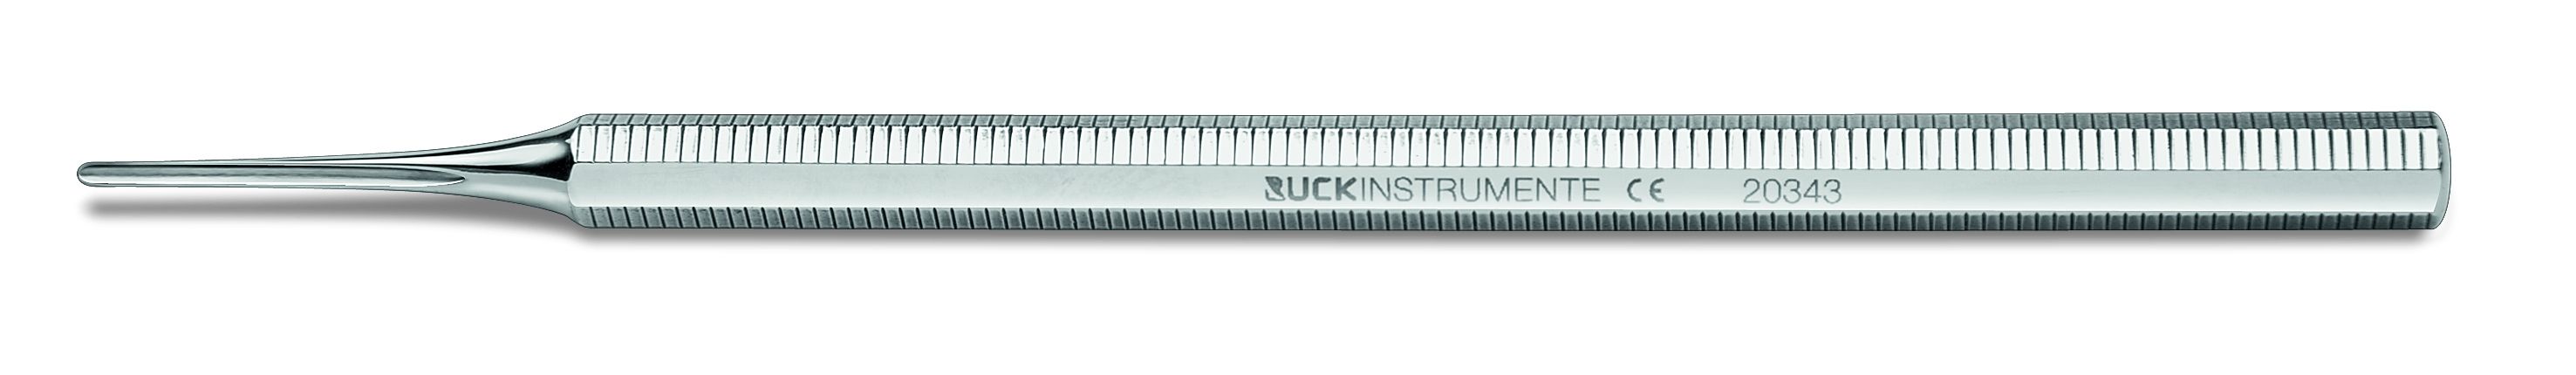 RUCK INSTRUMENTS HOLLOW NAIL CHISEL, STAINLESS STEEL / 13.5CM X 1MM photo